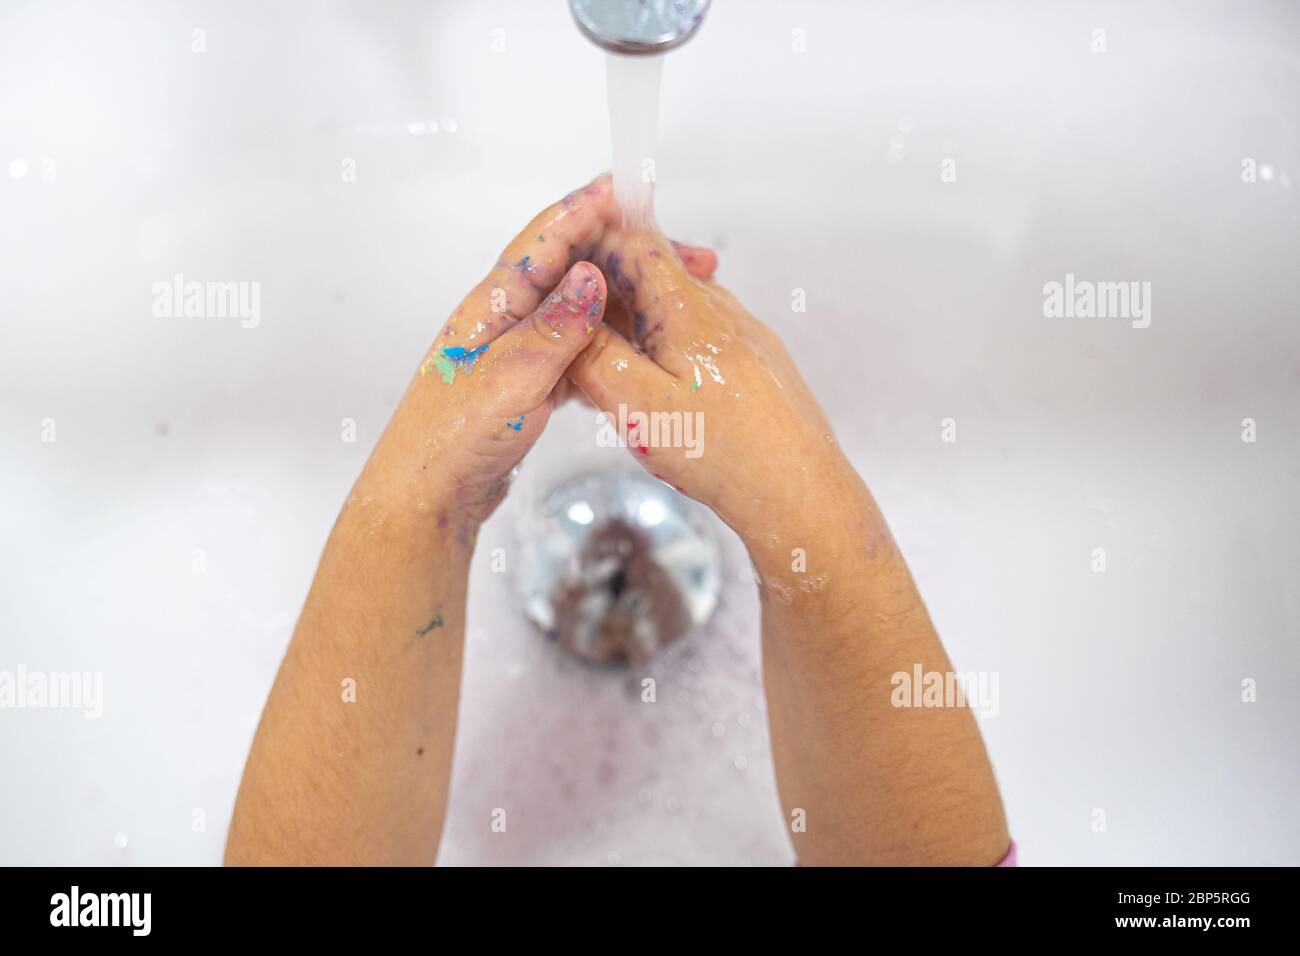 Washing hands on a white sink with water, child hands Stock Photo